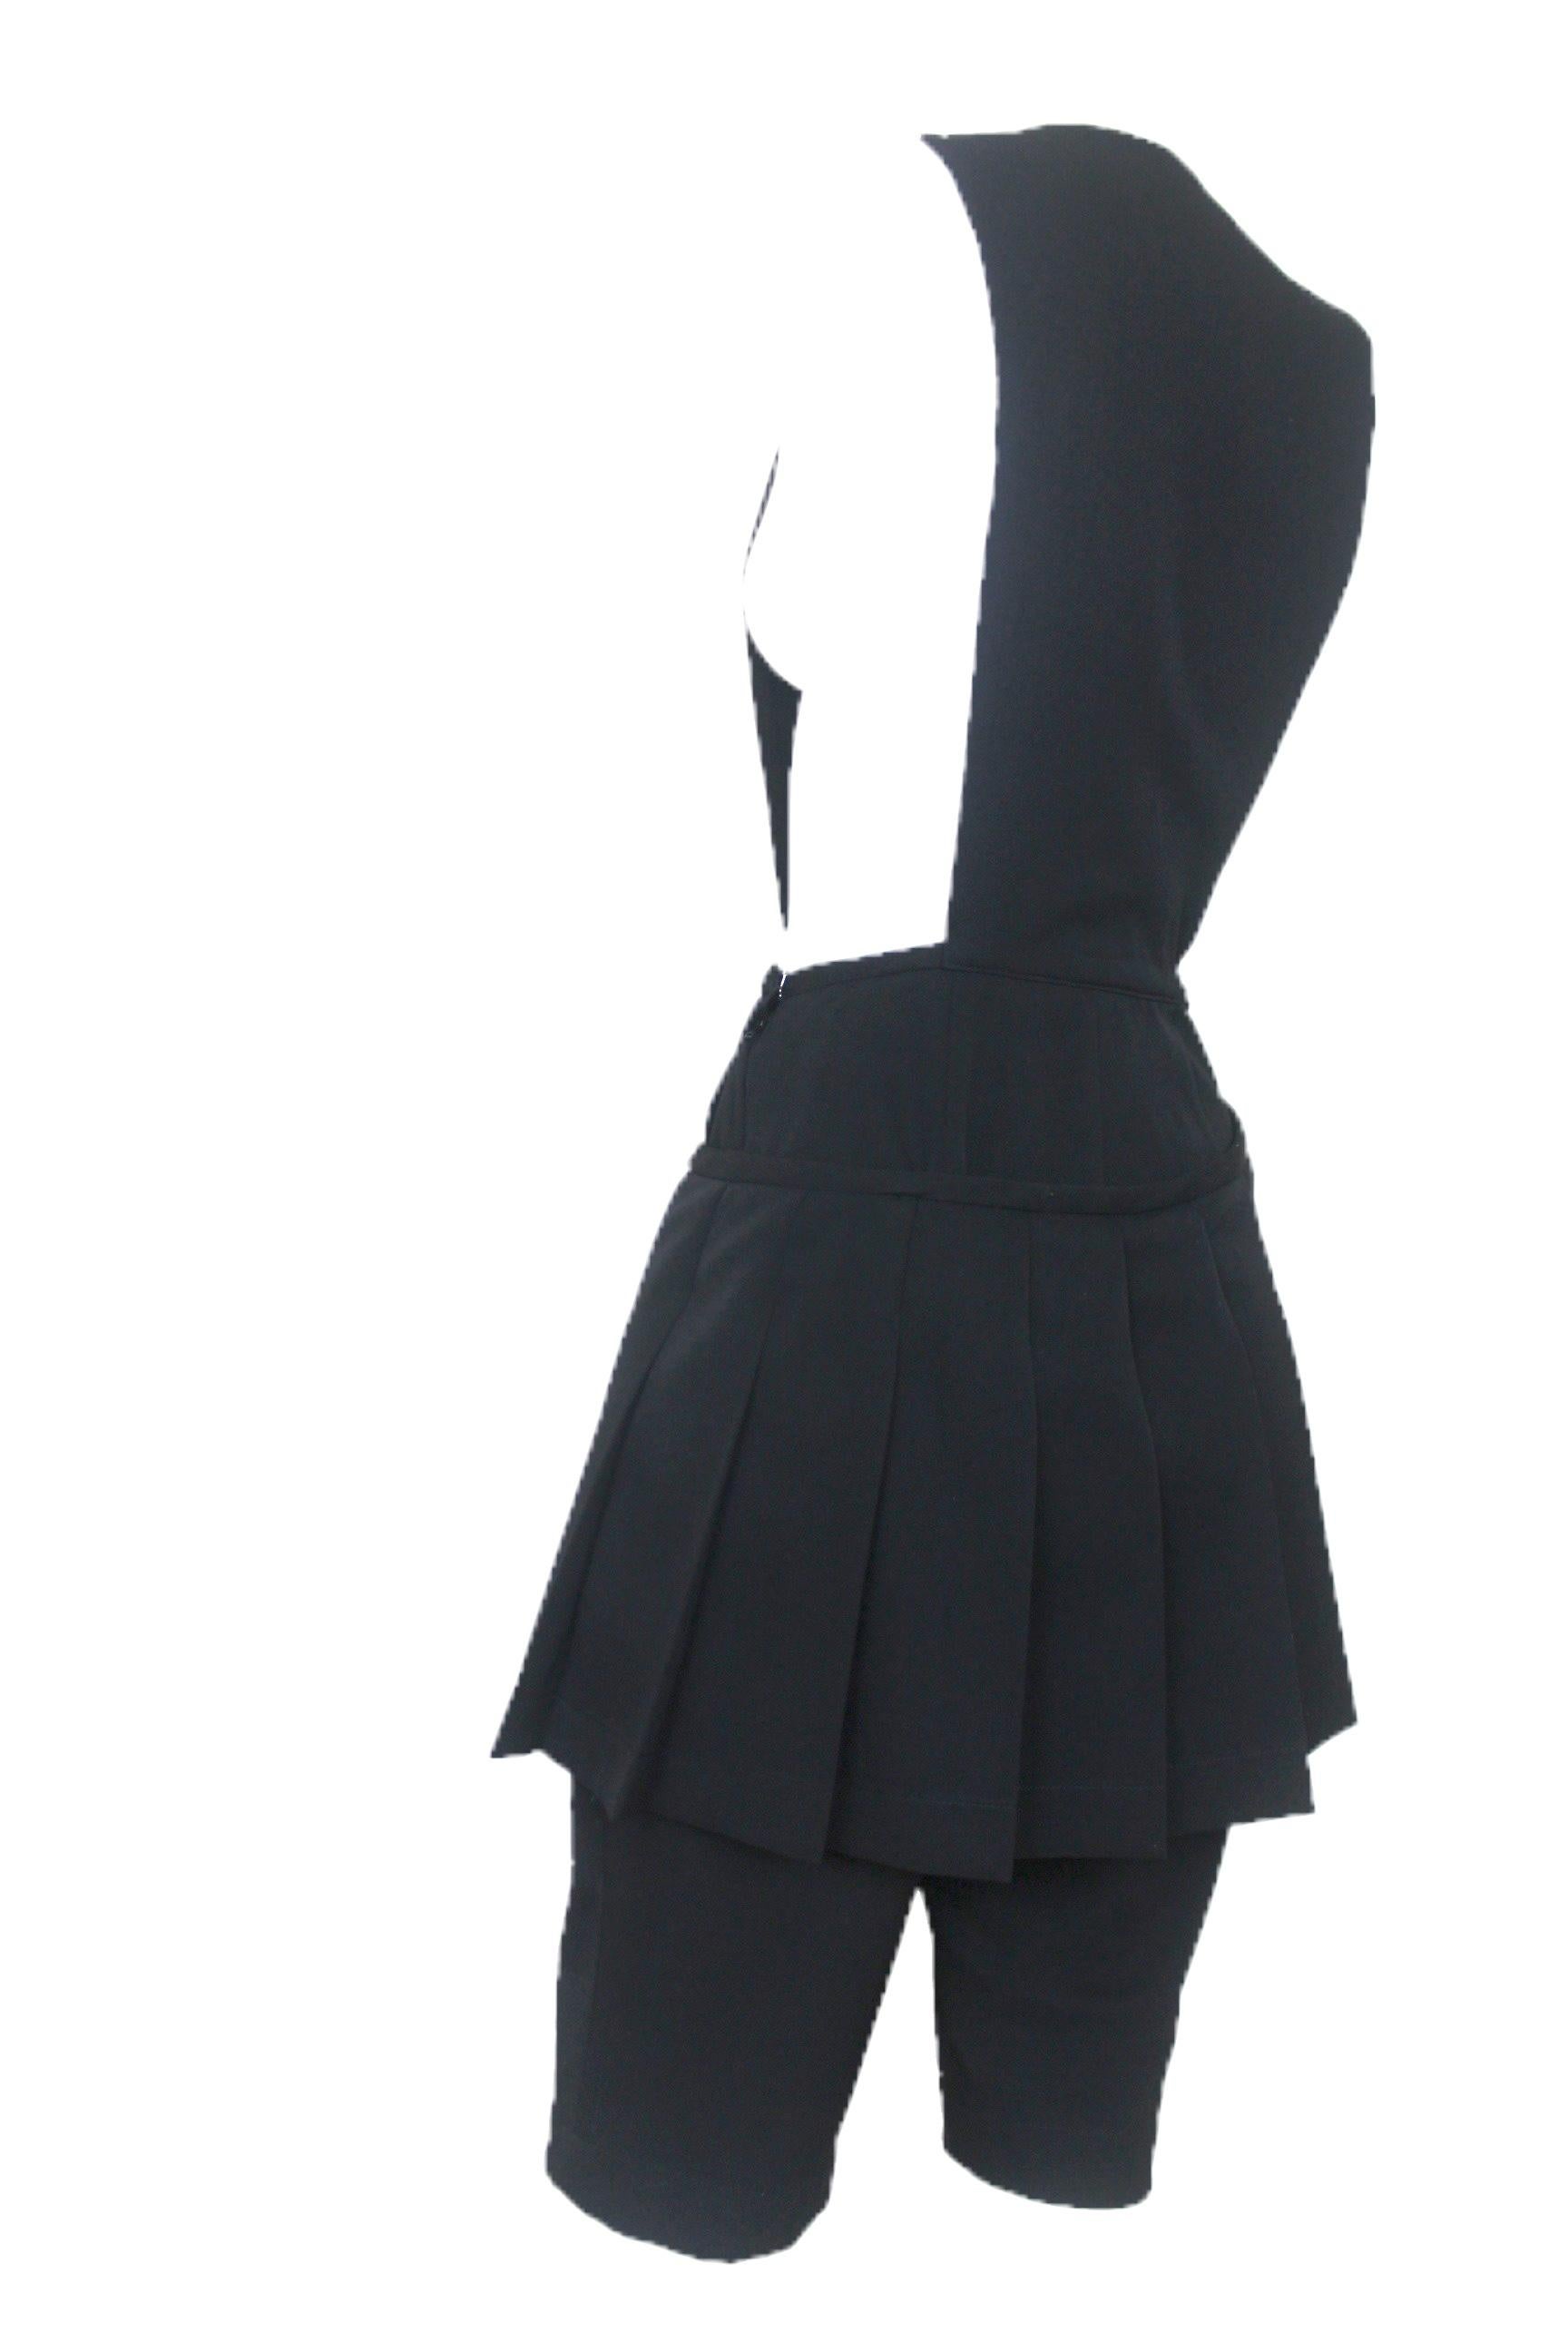 Comme des Garcons 1989 Collection Reverse Dungarees with attached Skirt ...